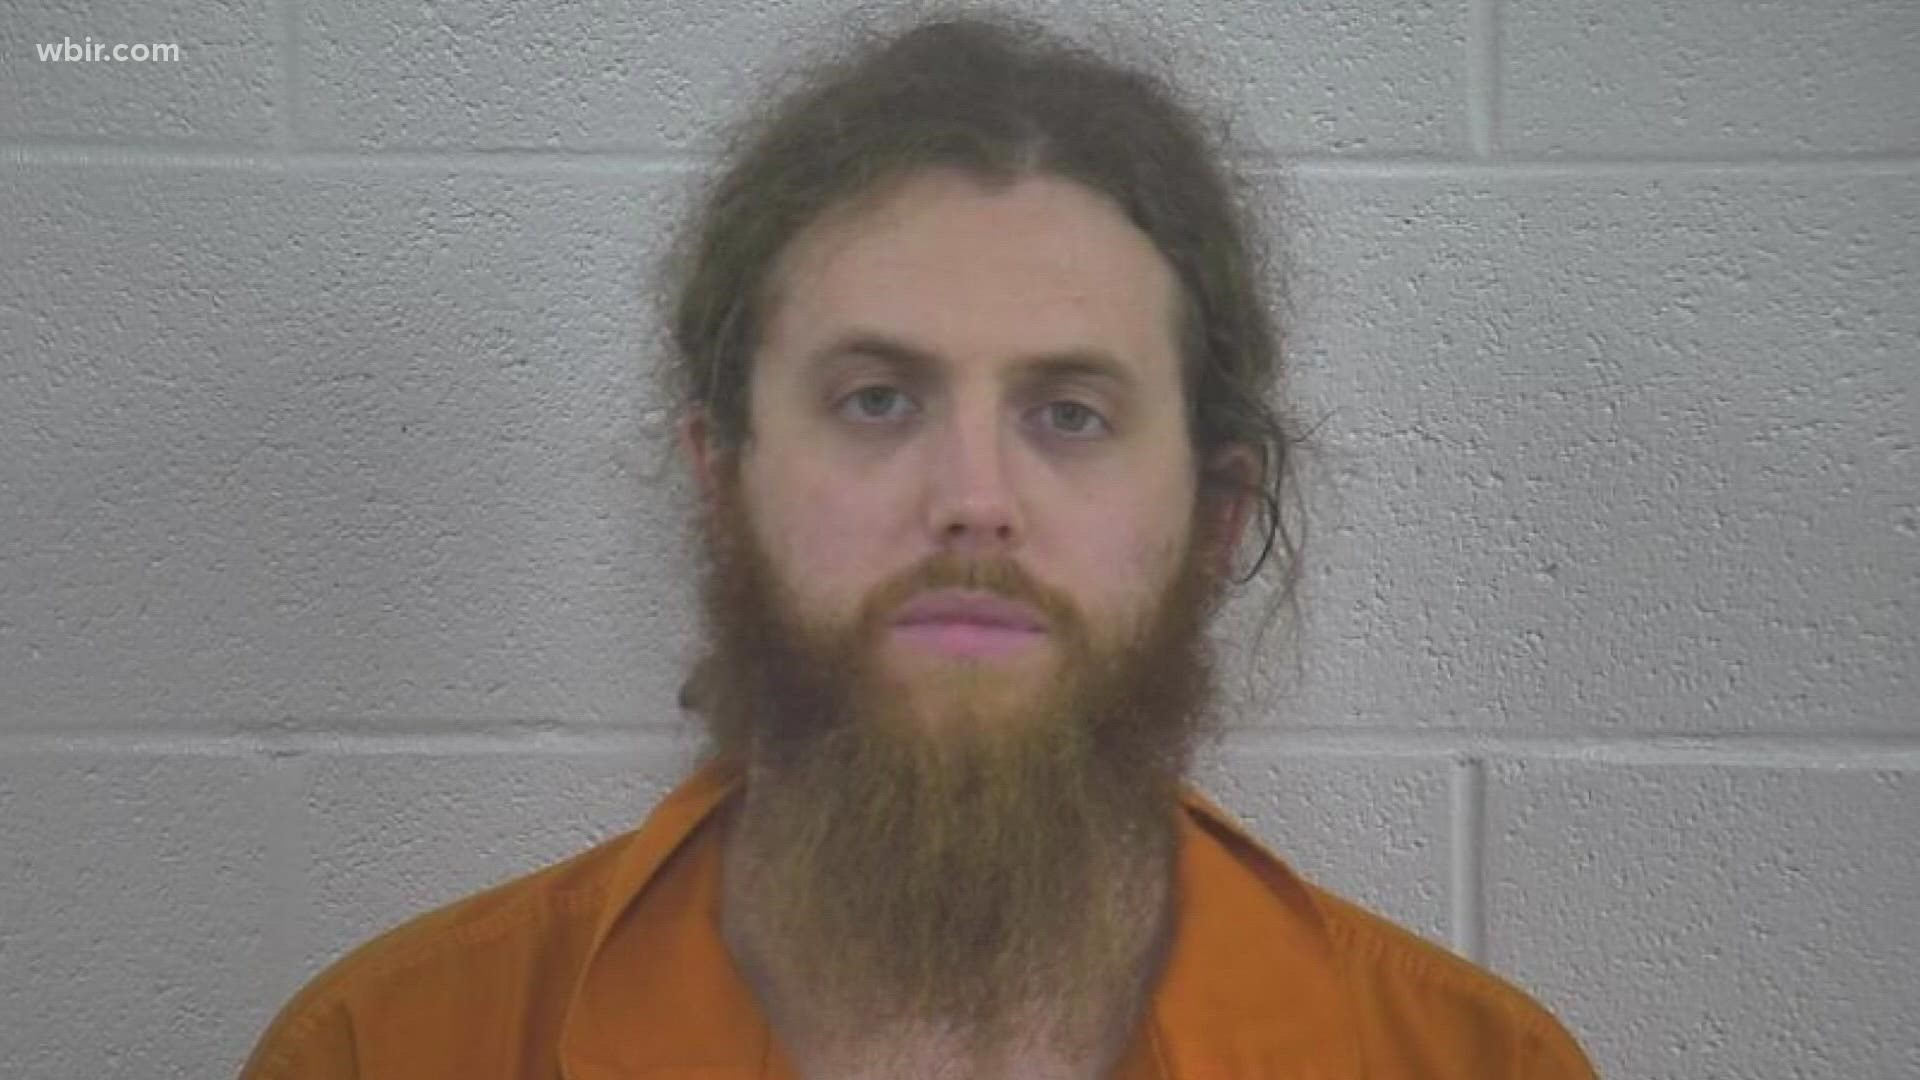 Benjamin Carpenter, a Knoxville man accused of helping translate ISIS materials, decided to represent himself in court.